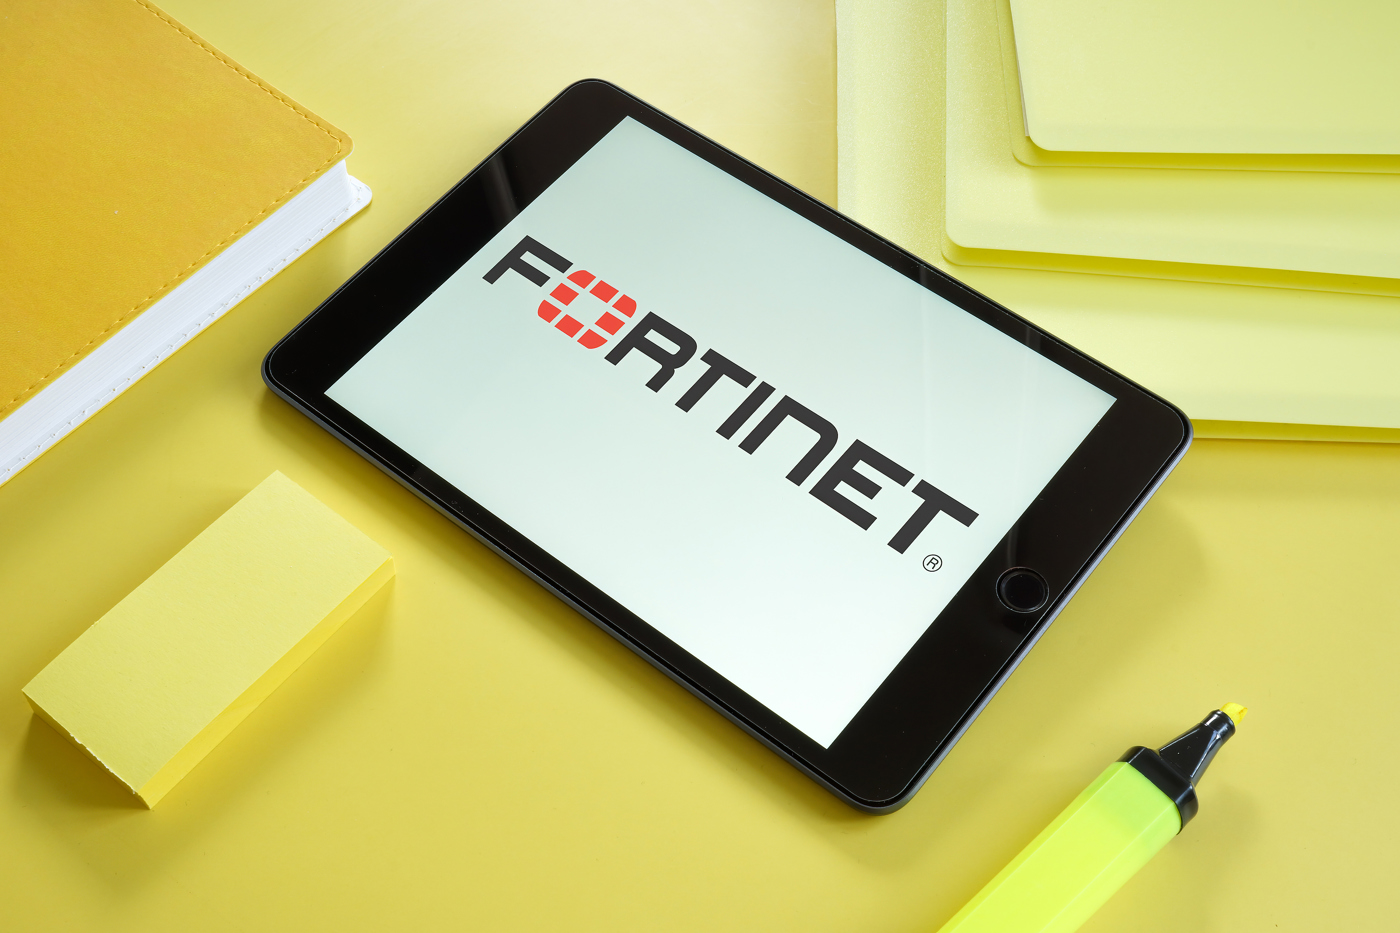 Fortinet stock, FTNT stock, cybersecurity stocks